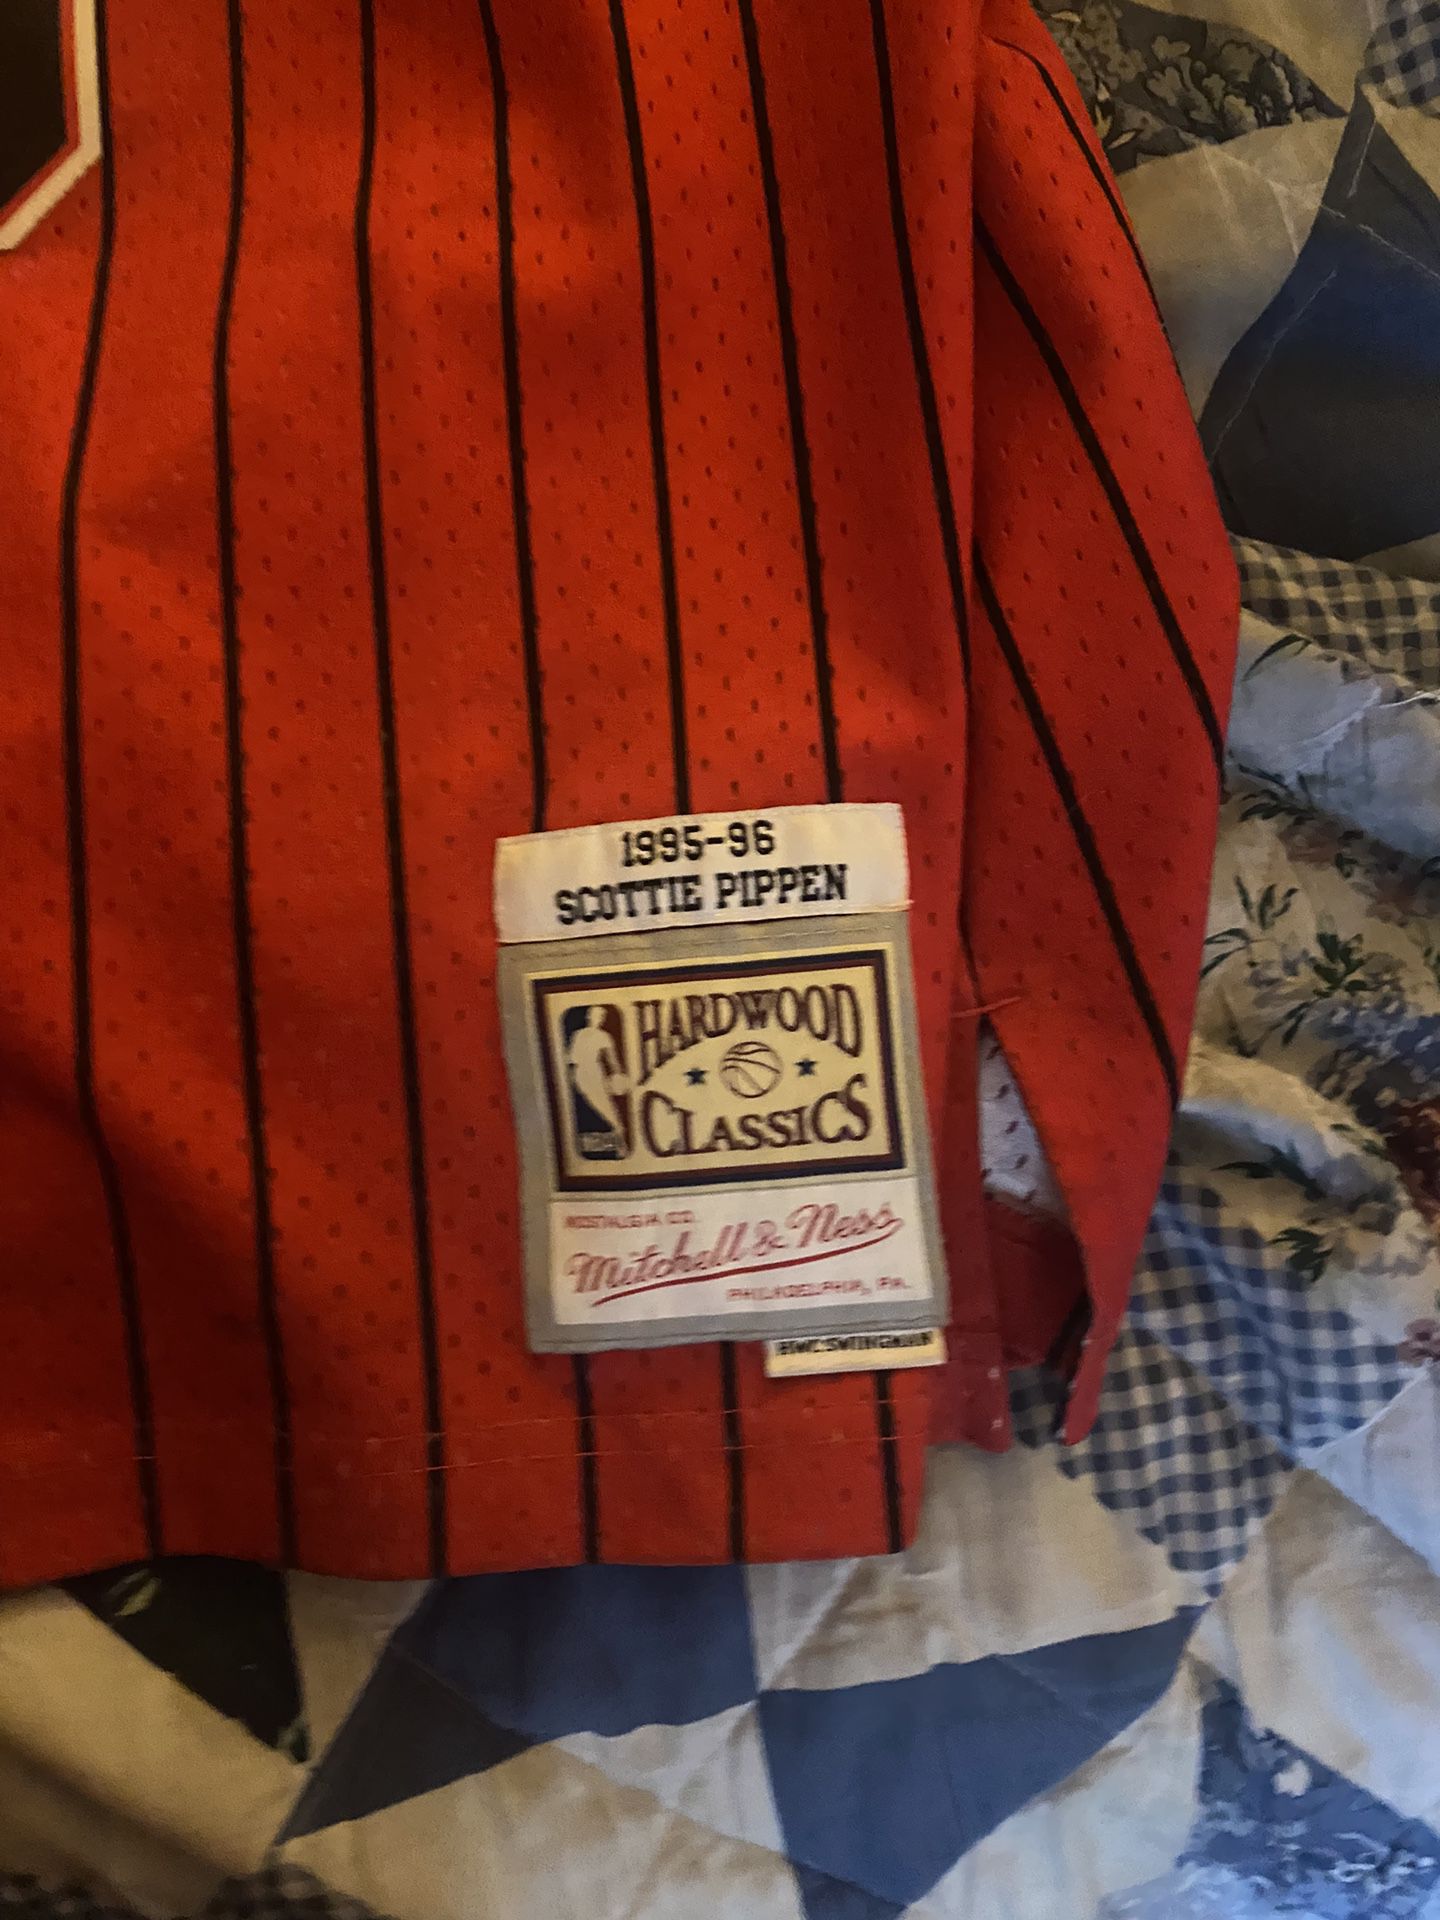 Scottie Pippen Bulls Jersey Addidas Hardwood Classic for Sale in Queens, NY  - OfferUp